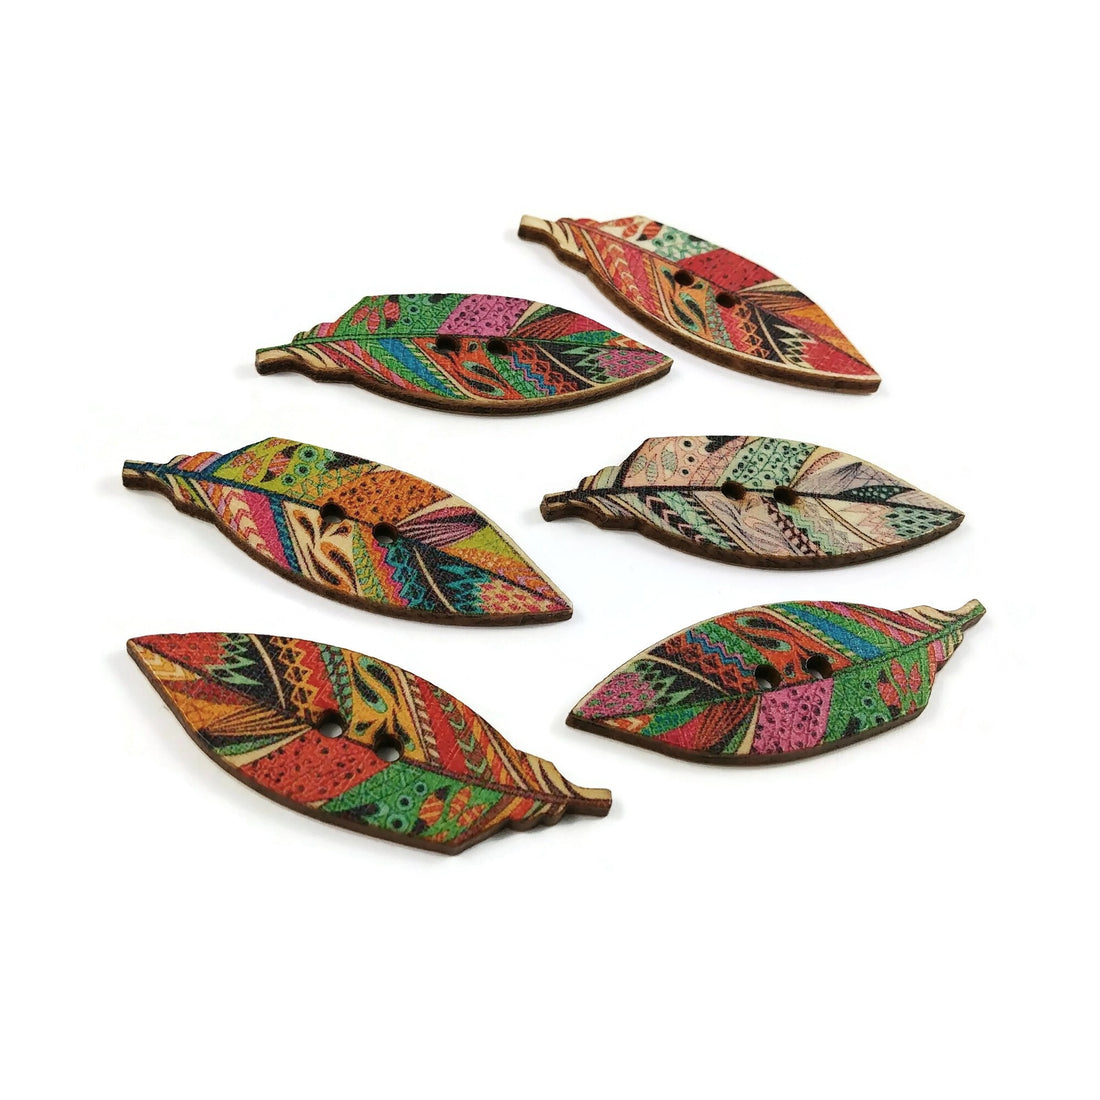 Indian feather wood sewing buttons - 6 Mixed Patterns scrapbooking buttons